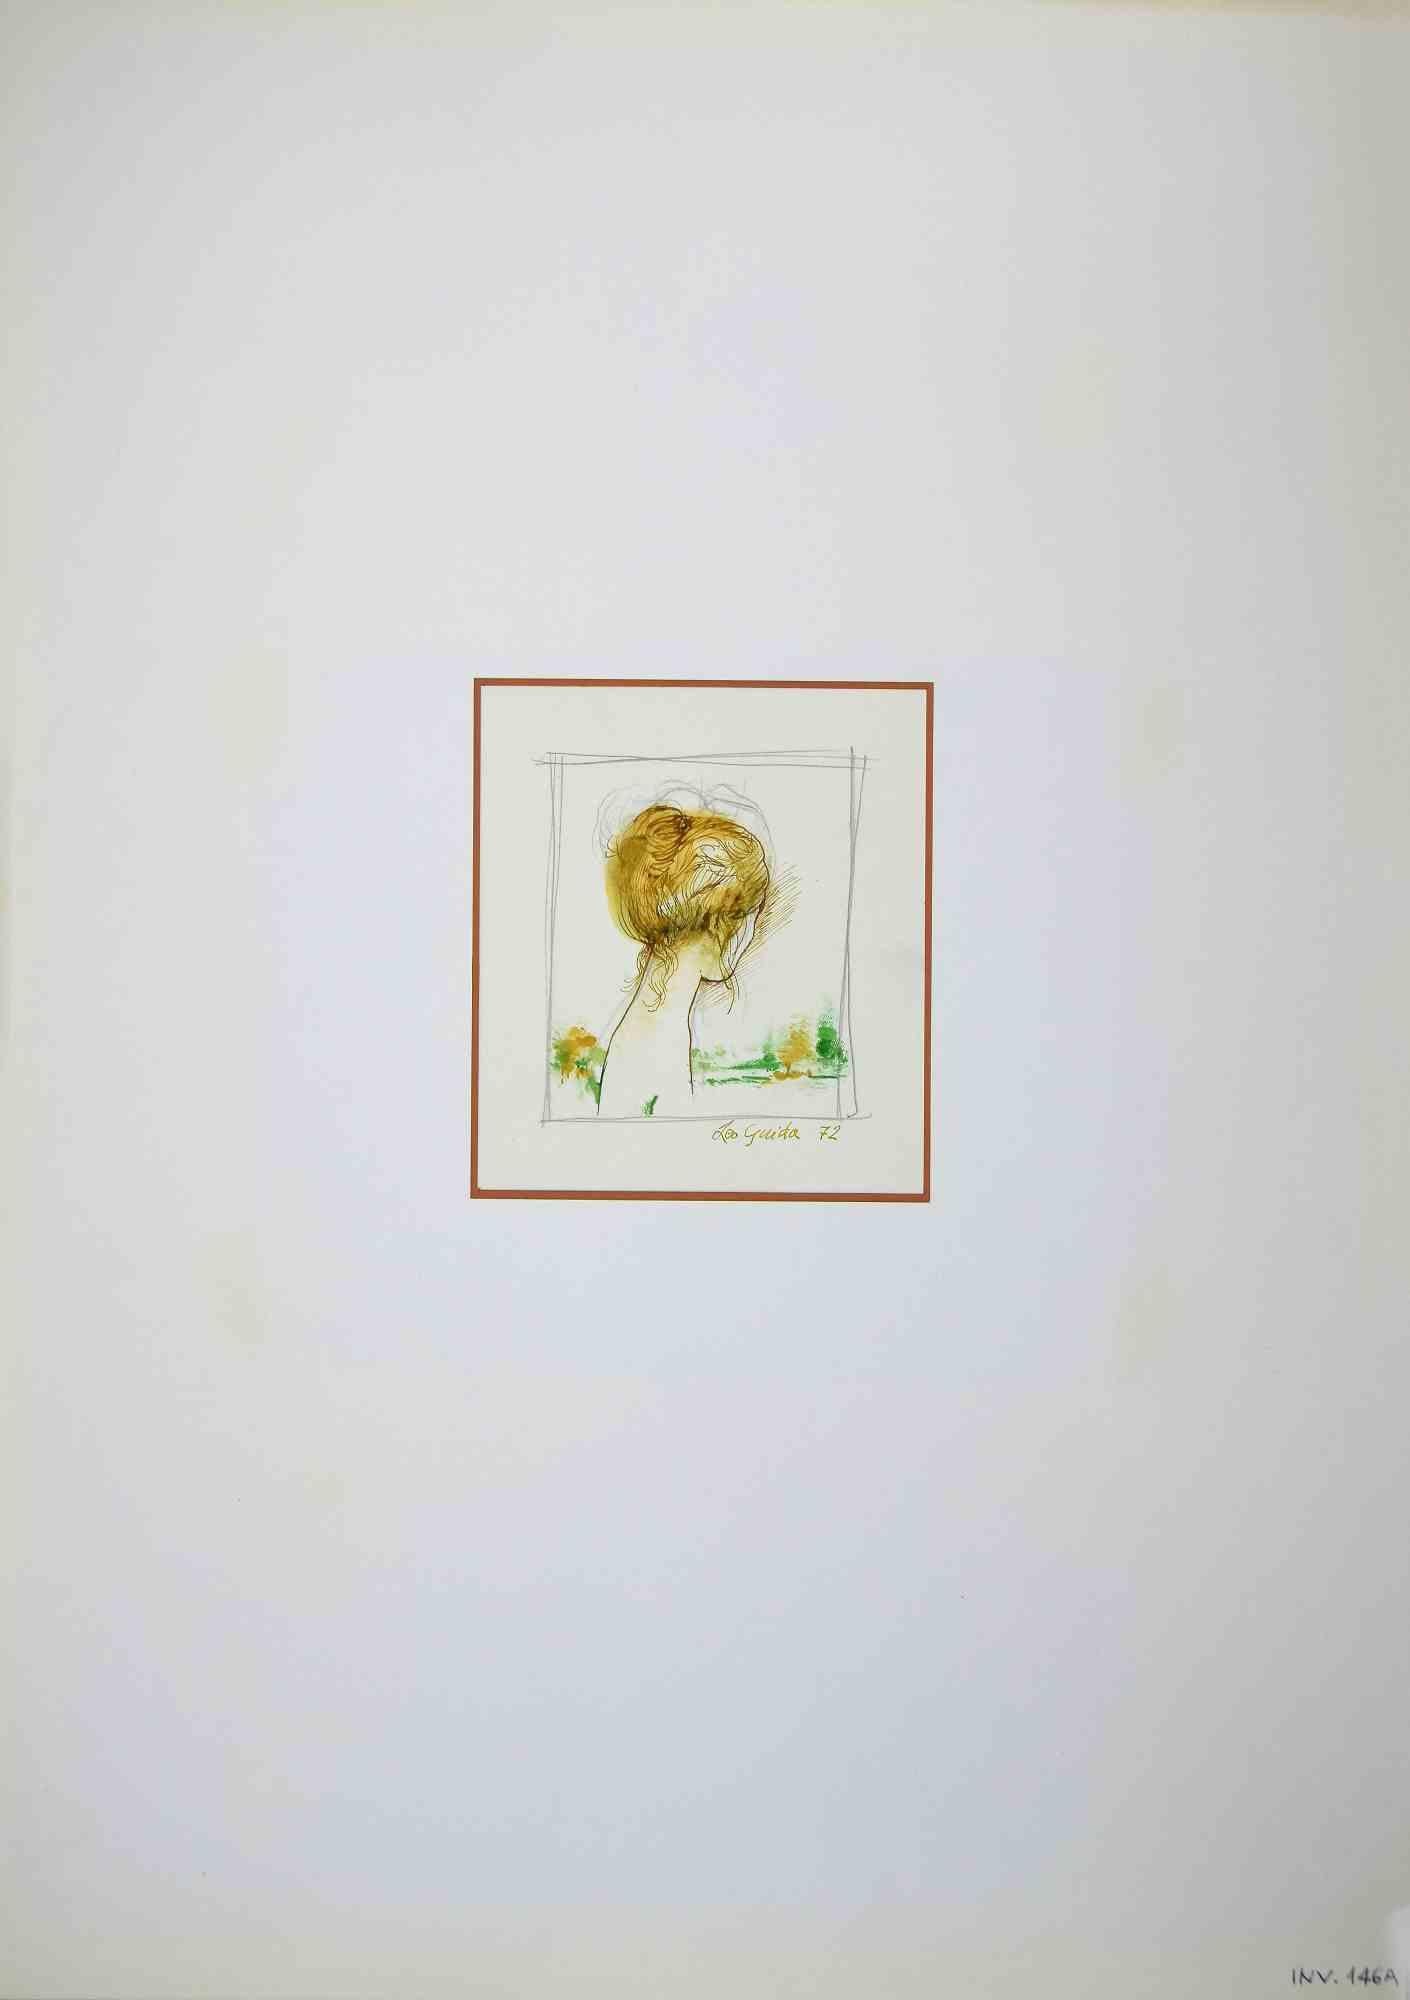 Portrait from Behind is an original drawing in ink and watercolor realized by Leo Guida in 1972.

Good condition.

Hand-signed.

Leo Guida  (1992 - 2017). Sensitive to current issues, artistic movements and historical techniques, Leo Guida has been